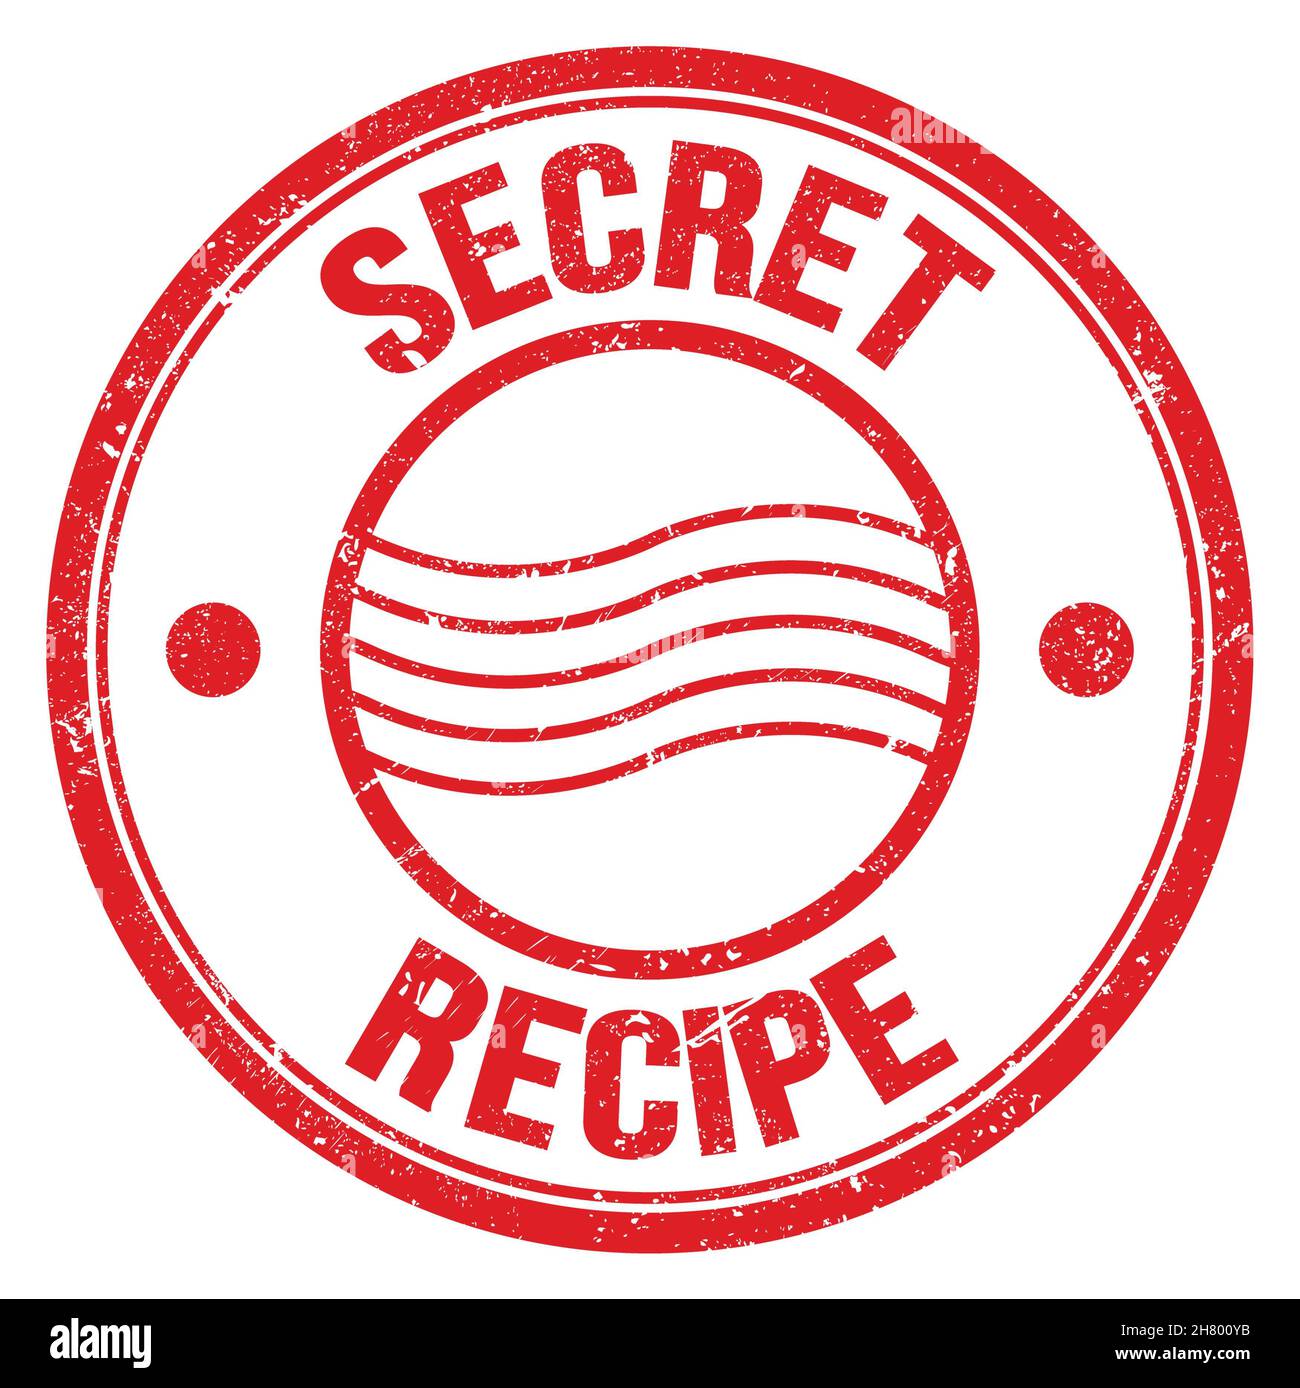 SECRET RECIPE text written on red round vintage rubber stamp Stock Photo -  Alamy